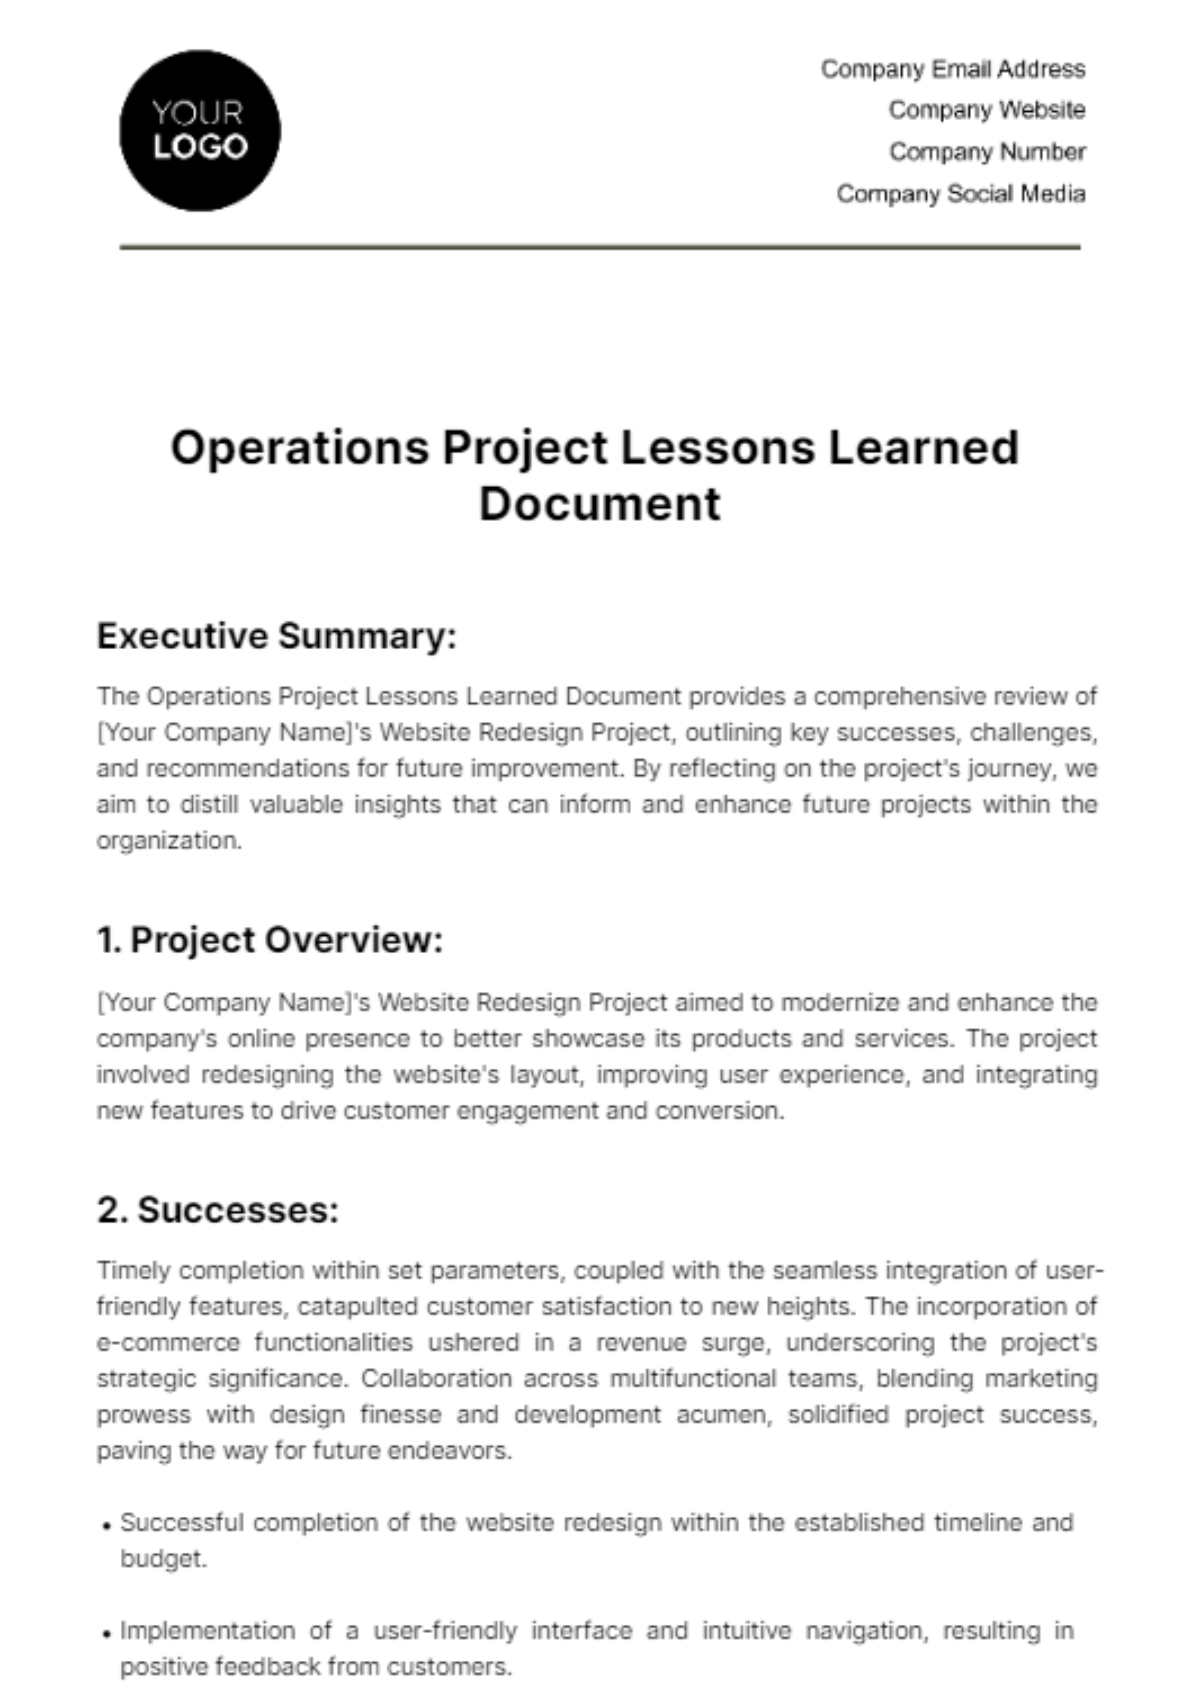 Operations Project Lessons Learned Document Template